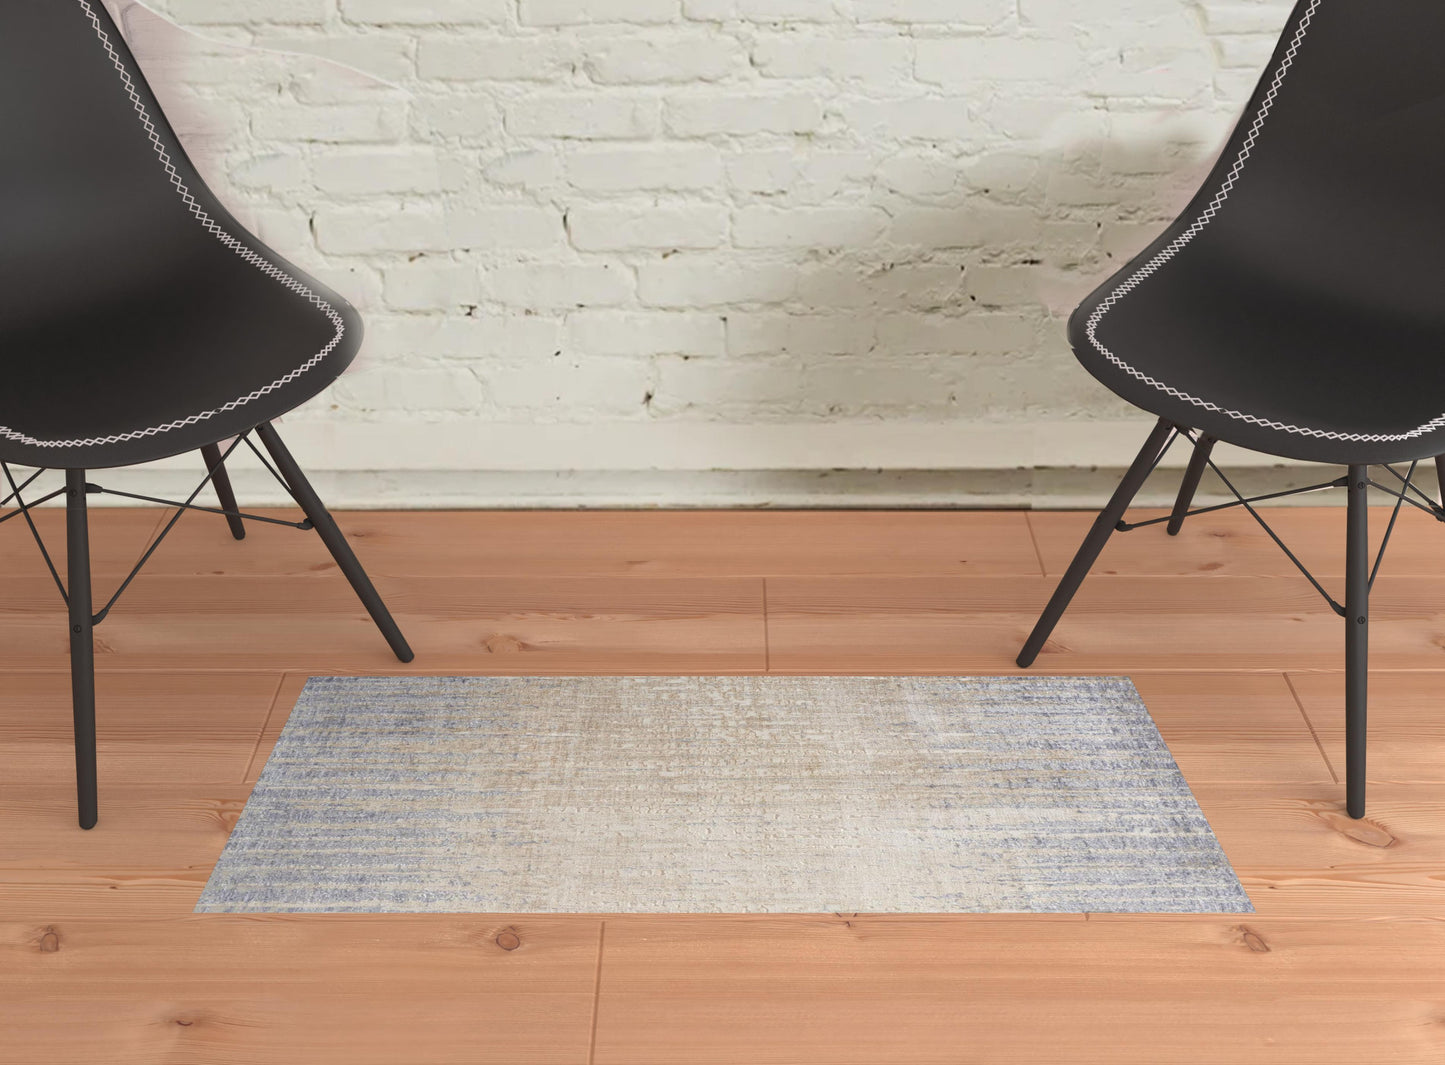 8' X 10' Tan Brown And Blue Abstract Power Loom Distressed Area Rug